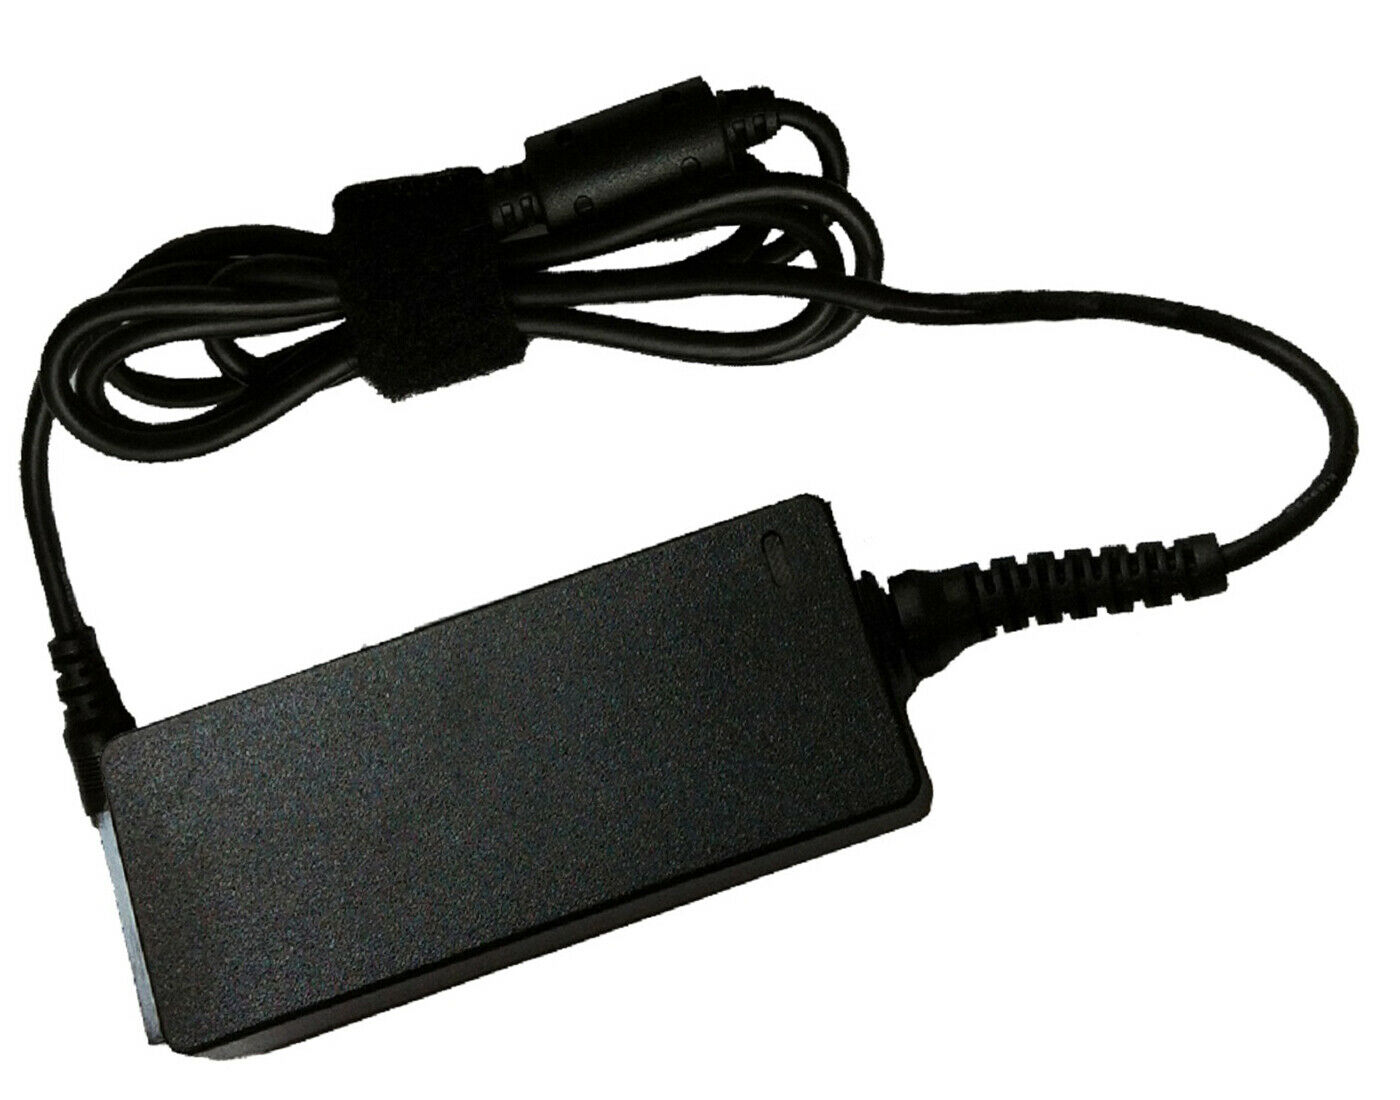 AC Adapter For Boston Acoustics TVee 10 TVEEM10B teevee Soundbar DC Power Supply Please Bear in Mind The pictures for - Click Image to Close